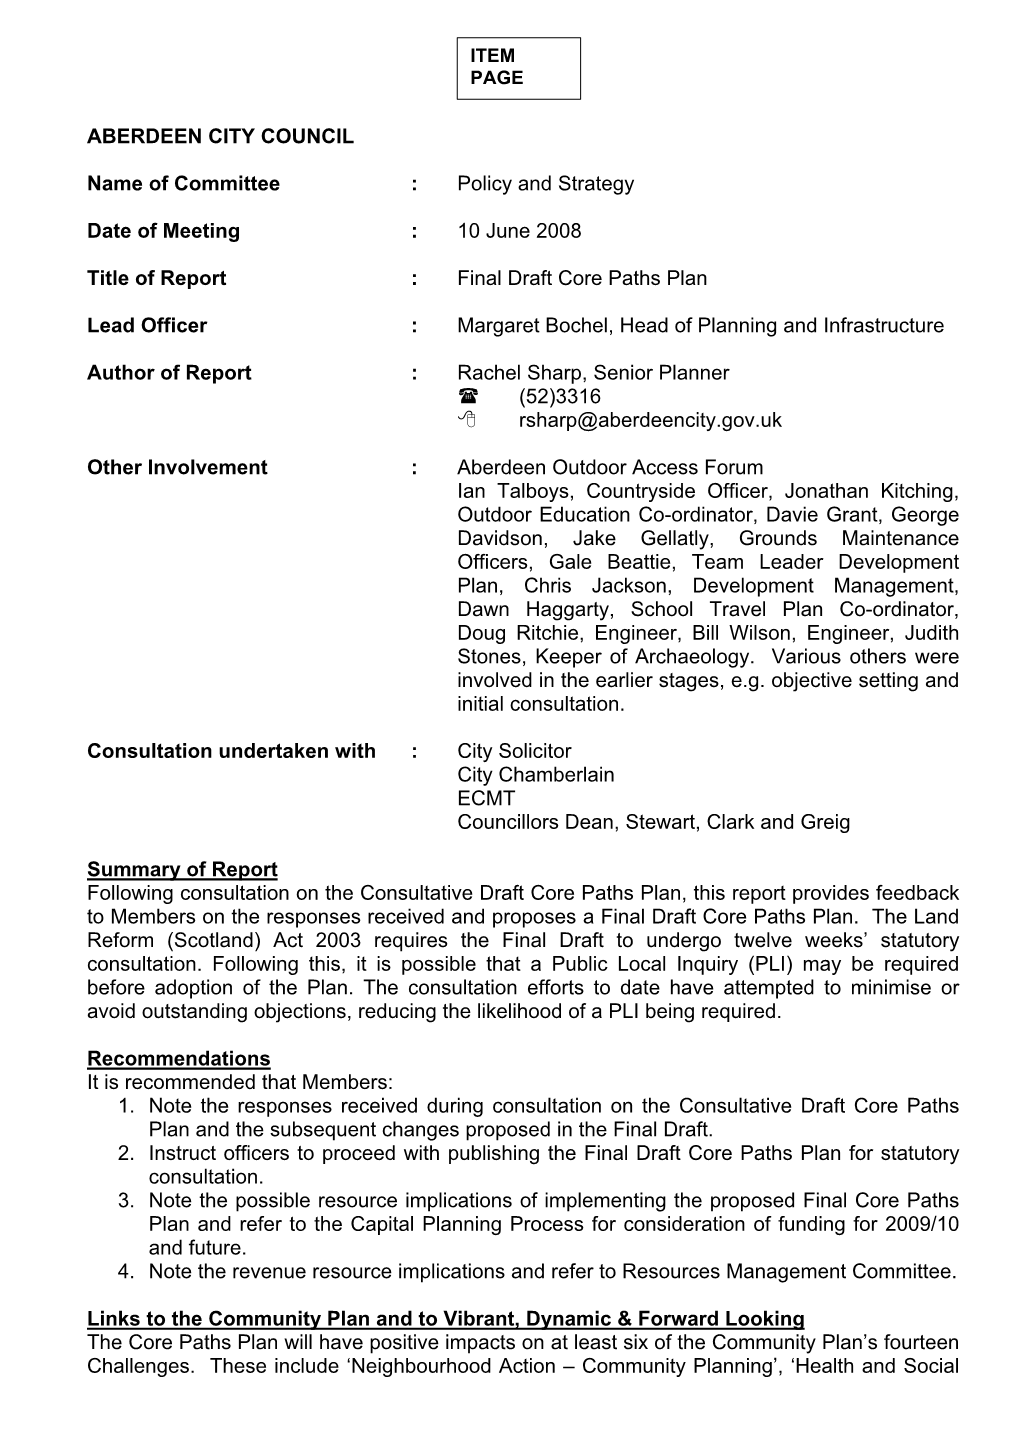 ABERDEEN CITY COUNCIL Name of Committee : Policy and Strategy Date of Meeting : 10 June 2008 Title of Report : Final Draft Core